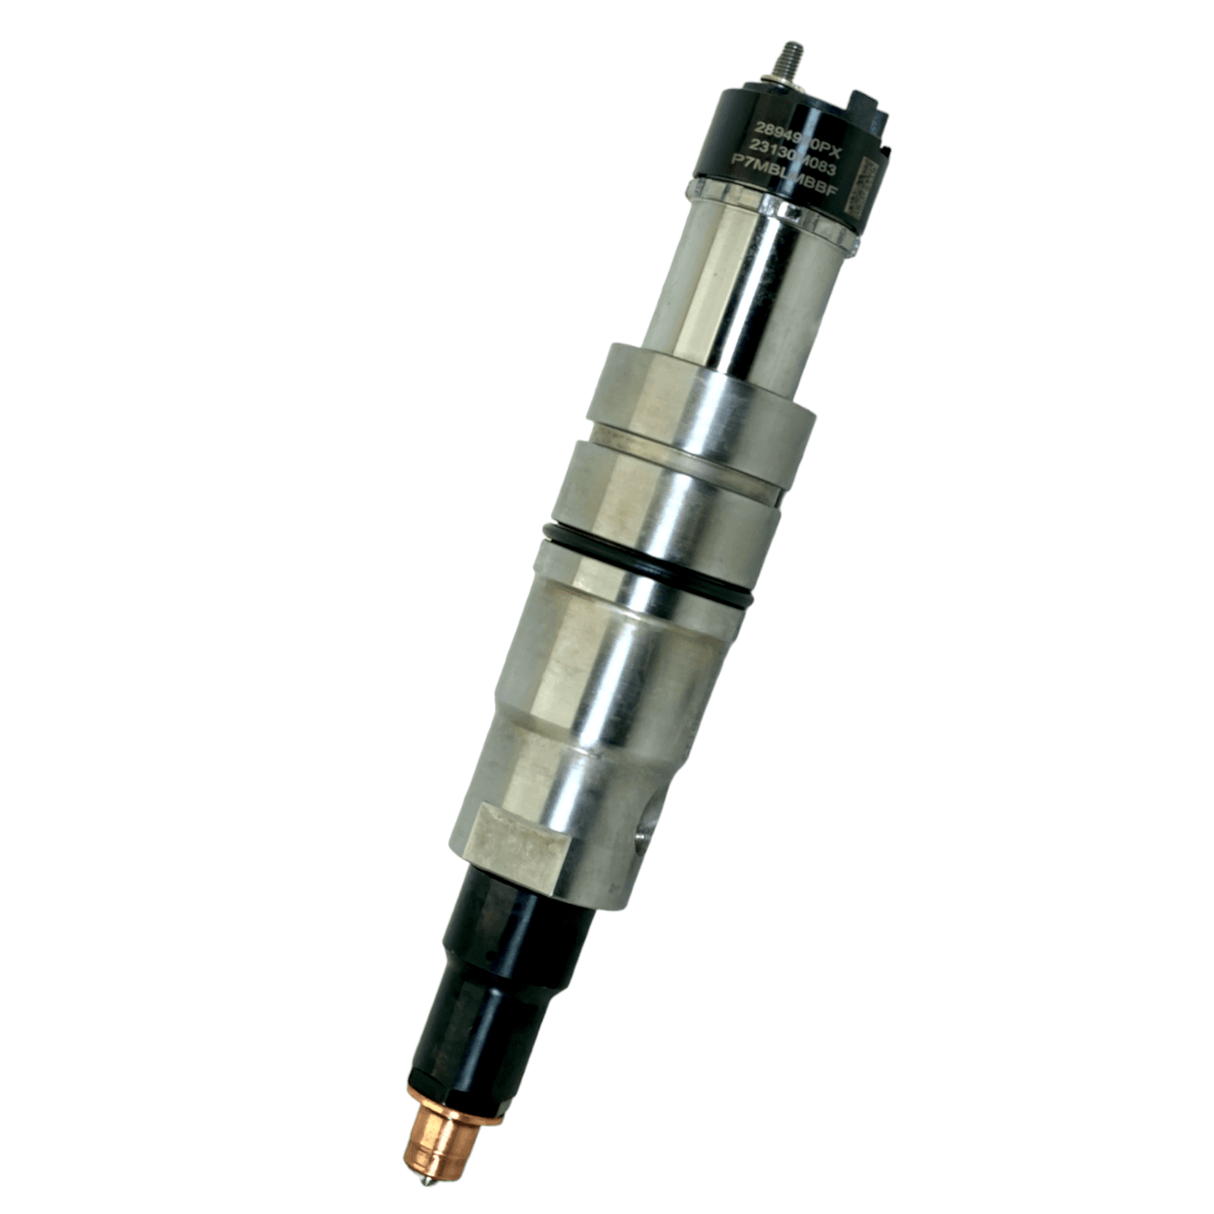 5579415Px Oem Cummins Fuel Injector For Xpi Fuel Systems On Epa10 Automotive 15L Isx/Qsx.